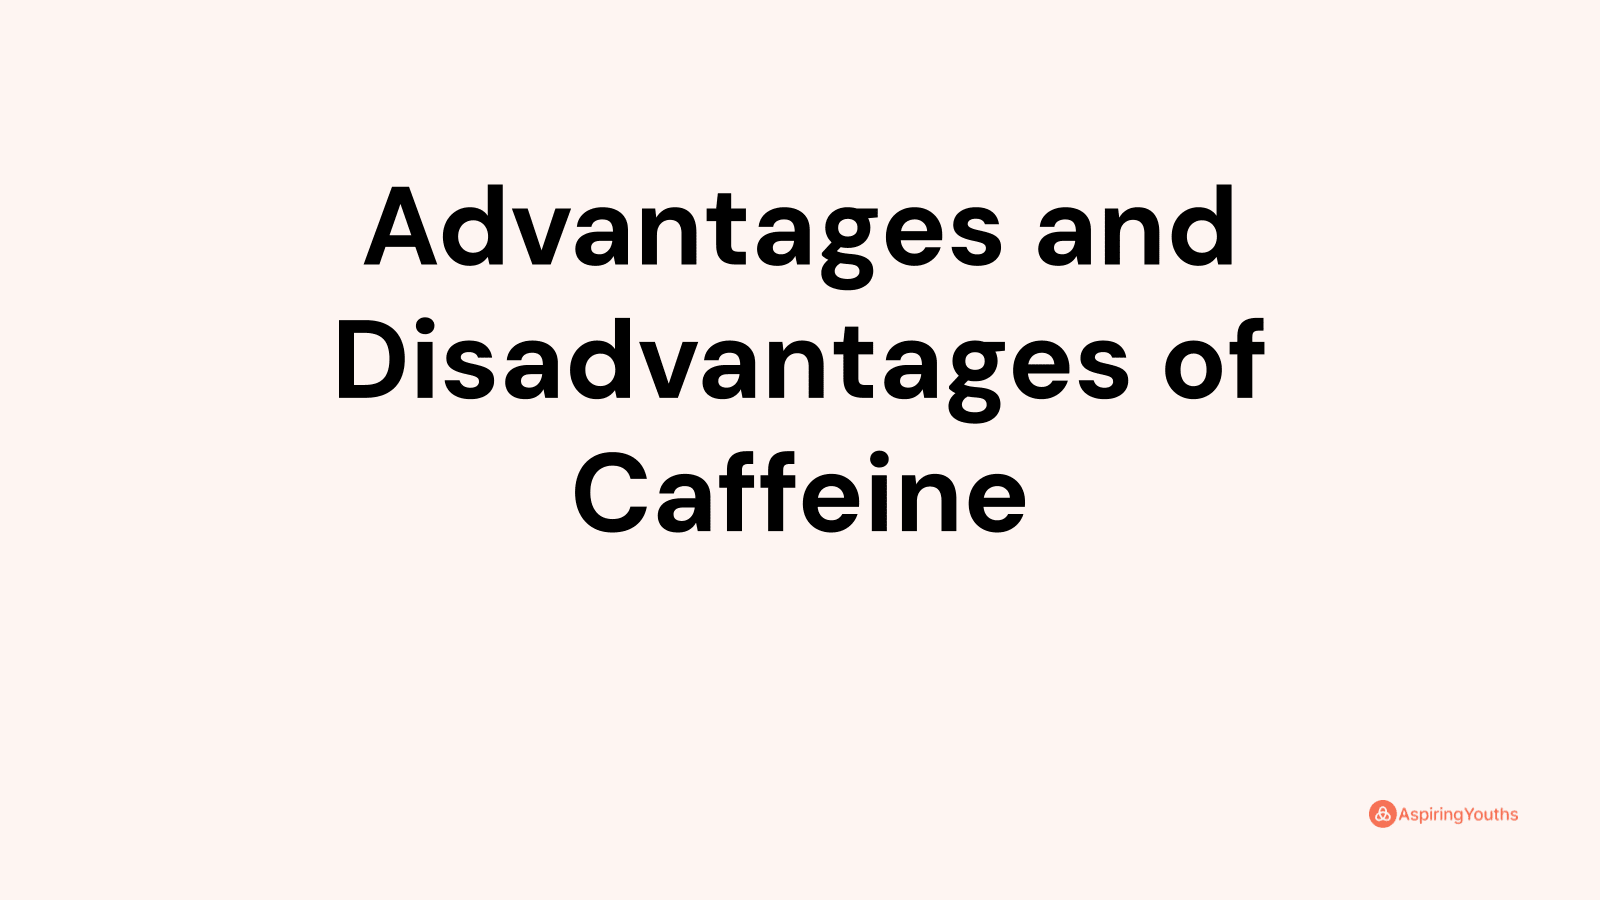 Advantages and disadvantages of Caffeine